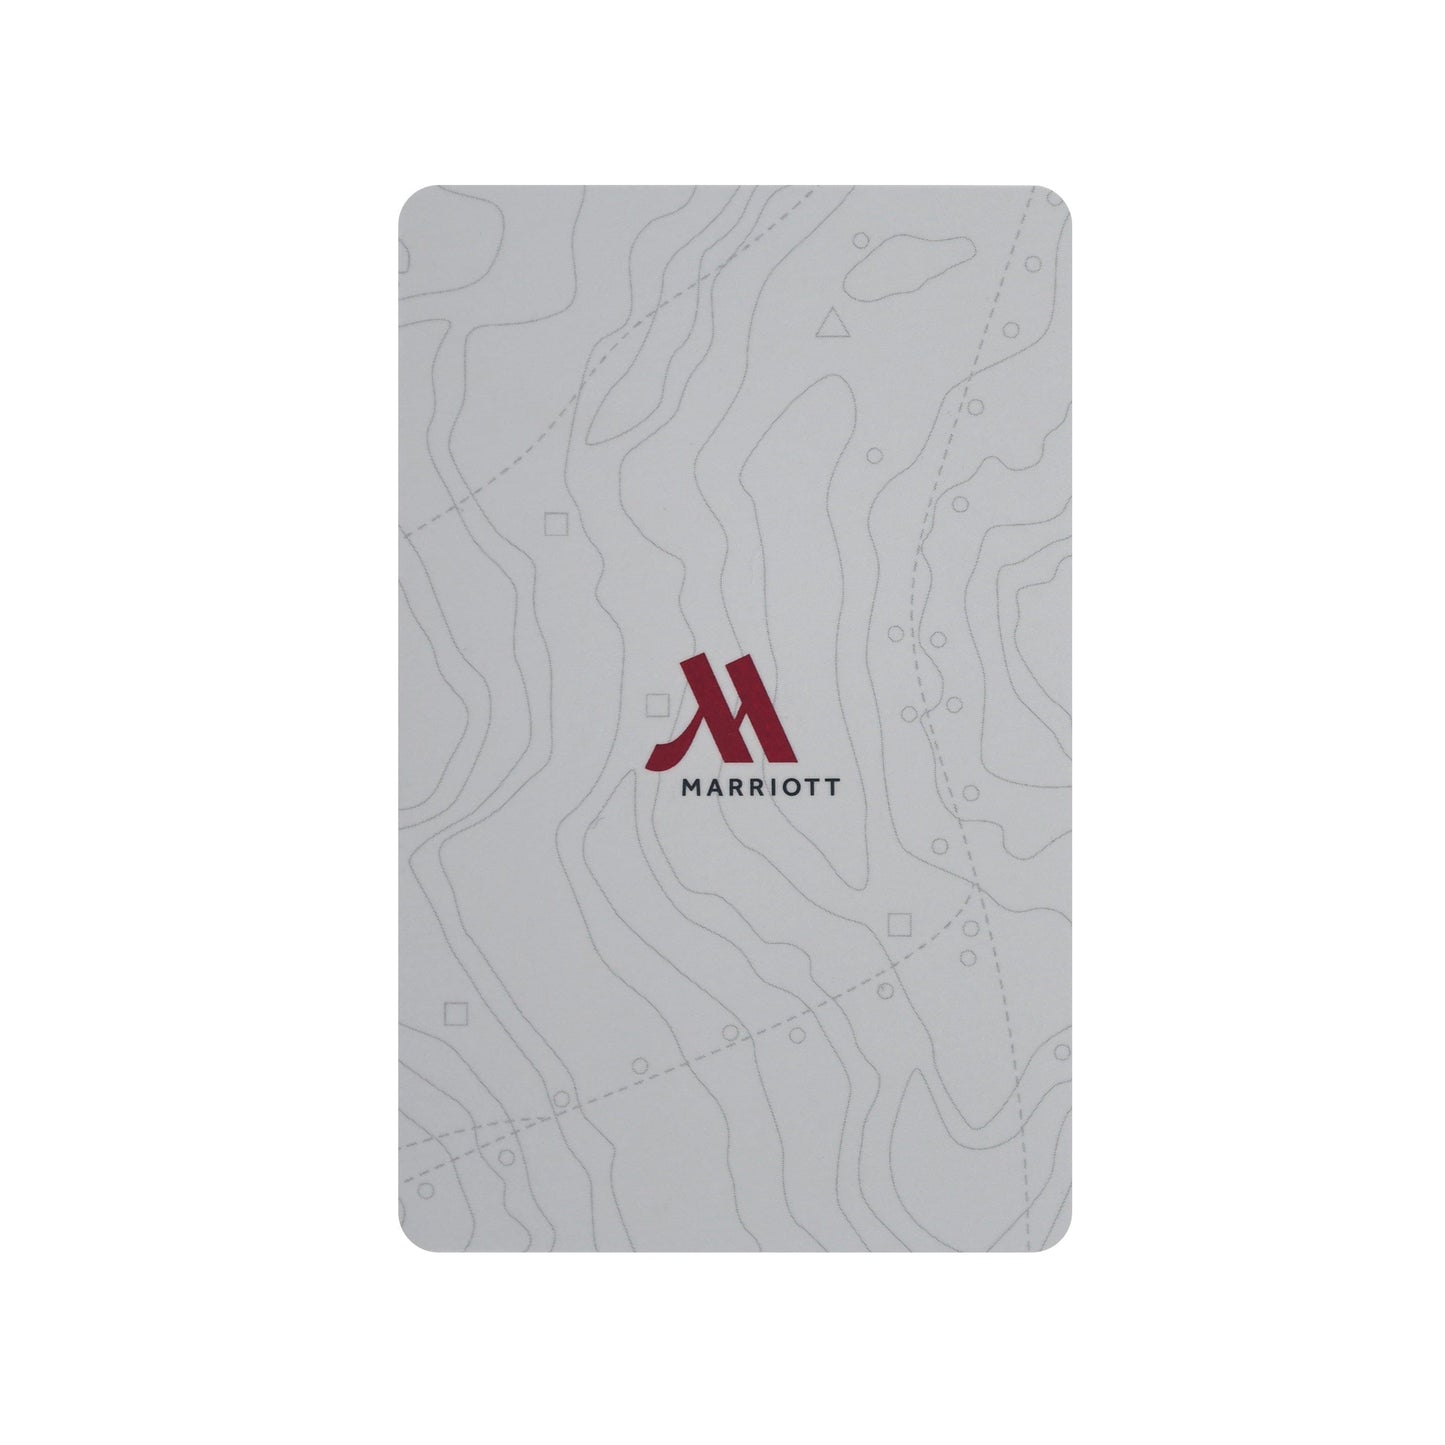 Marriott Full Service 1K RFID Key Cards Compatible with Assa Abloy* Guest Lock Systems-See Description (Sold in boxes of 200)